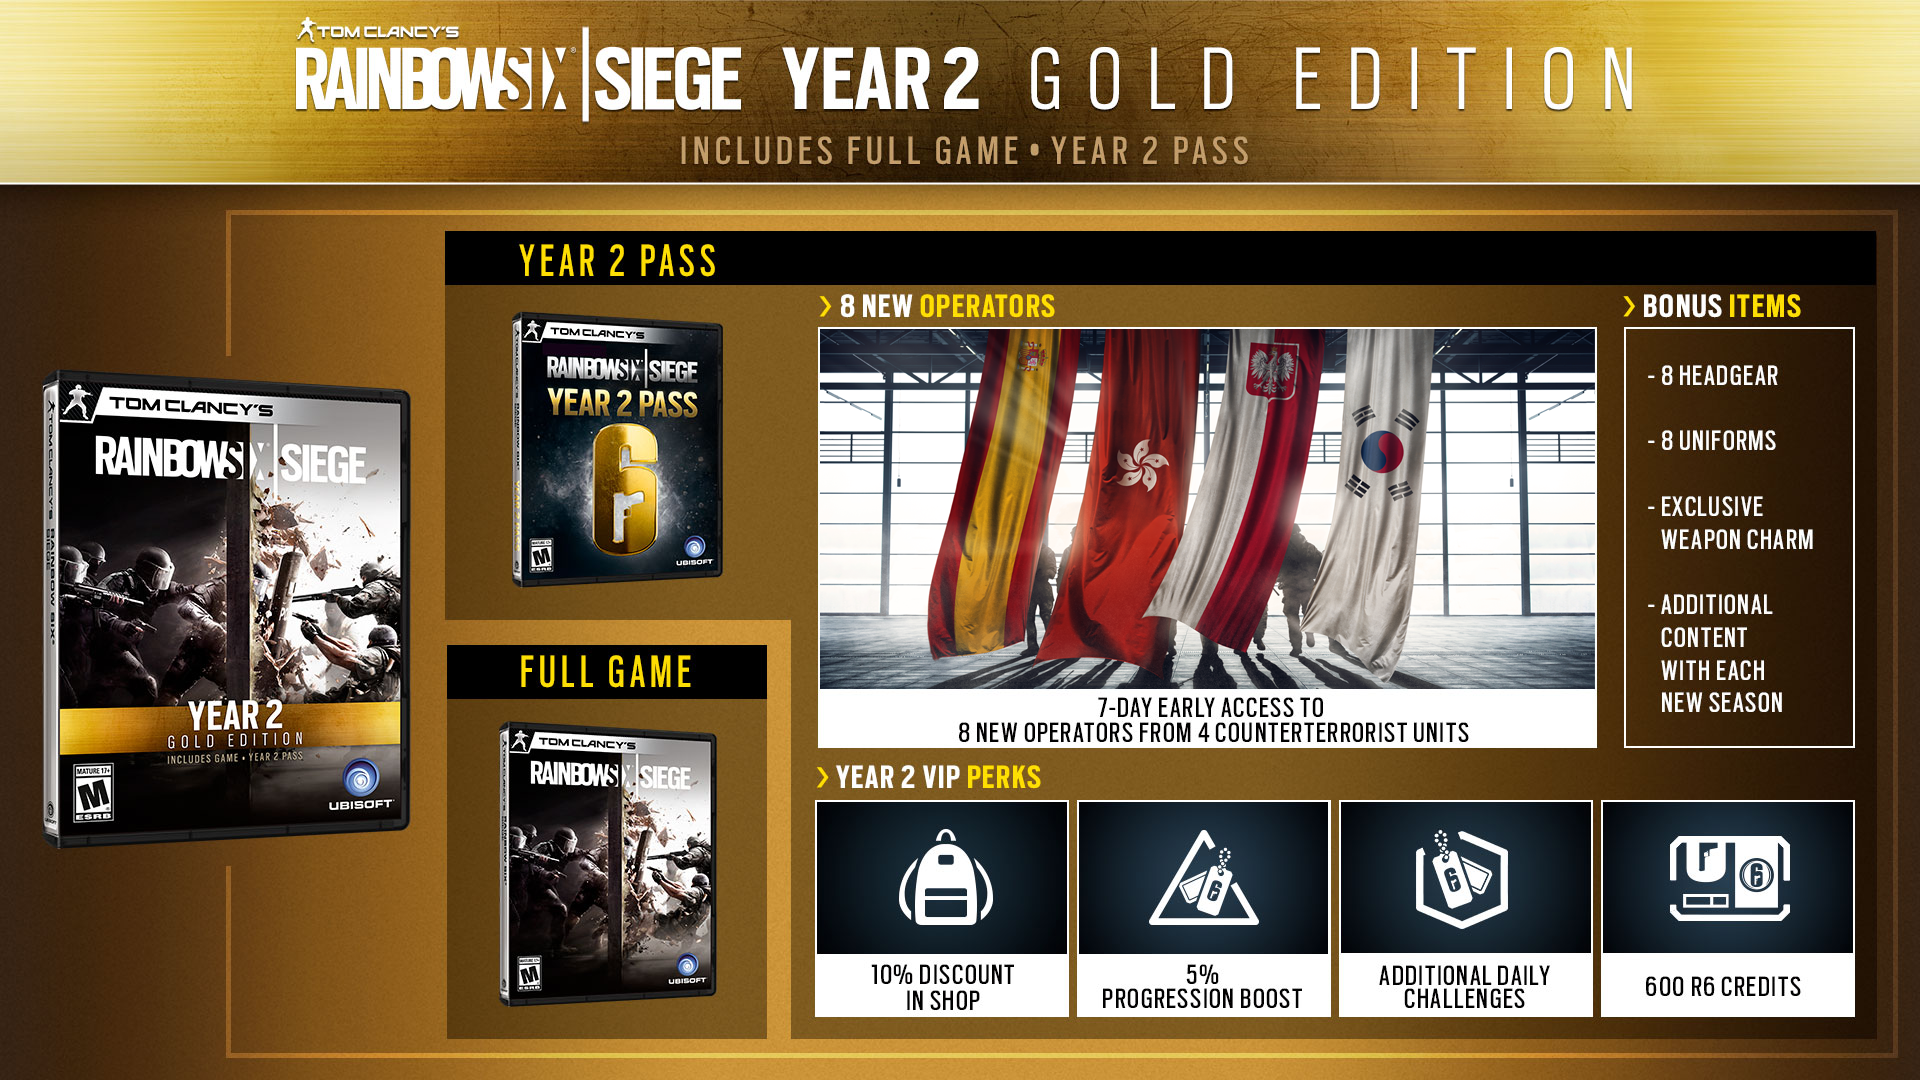 Bliv ved gift liv Get Prepared For Year 2 of Rainbow Six Siege